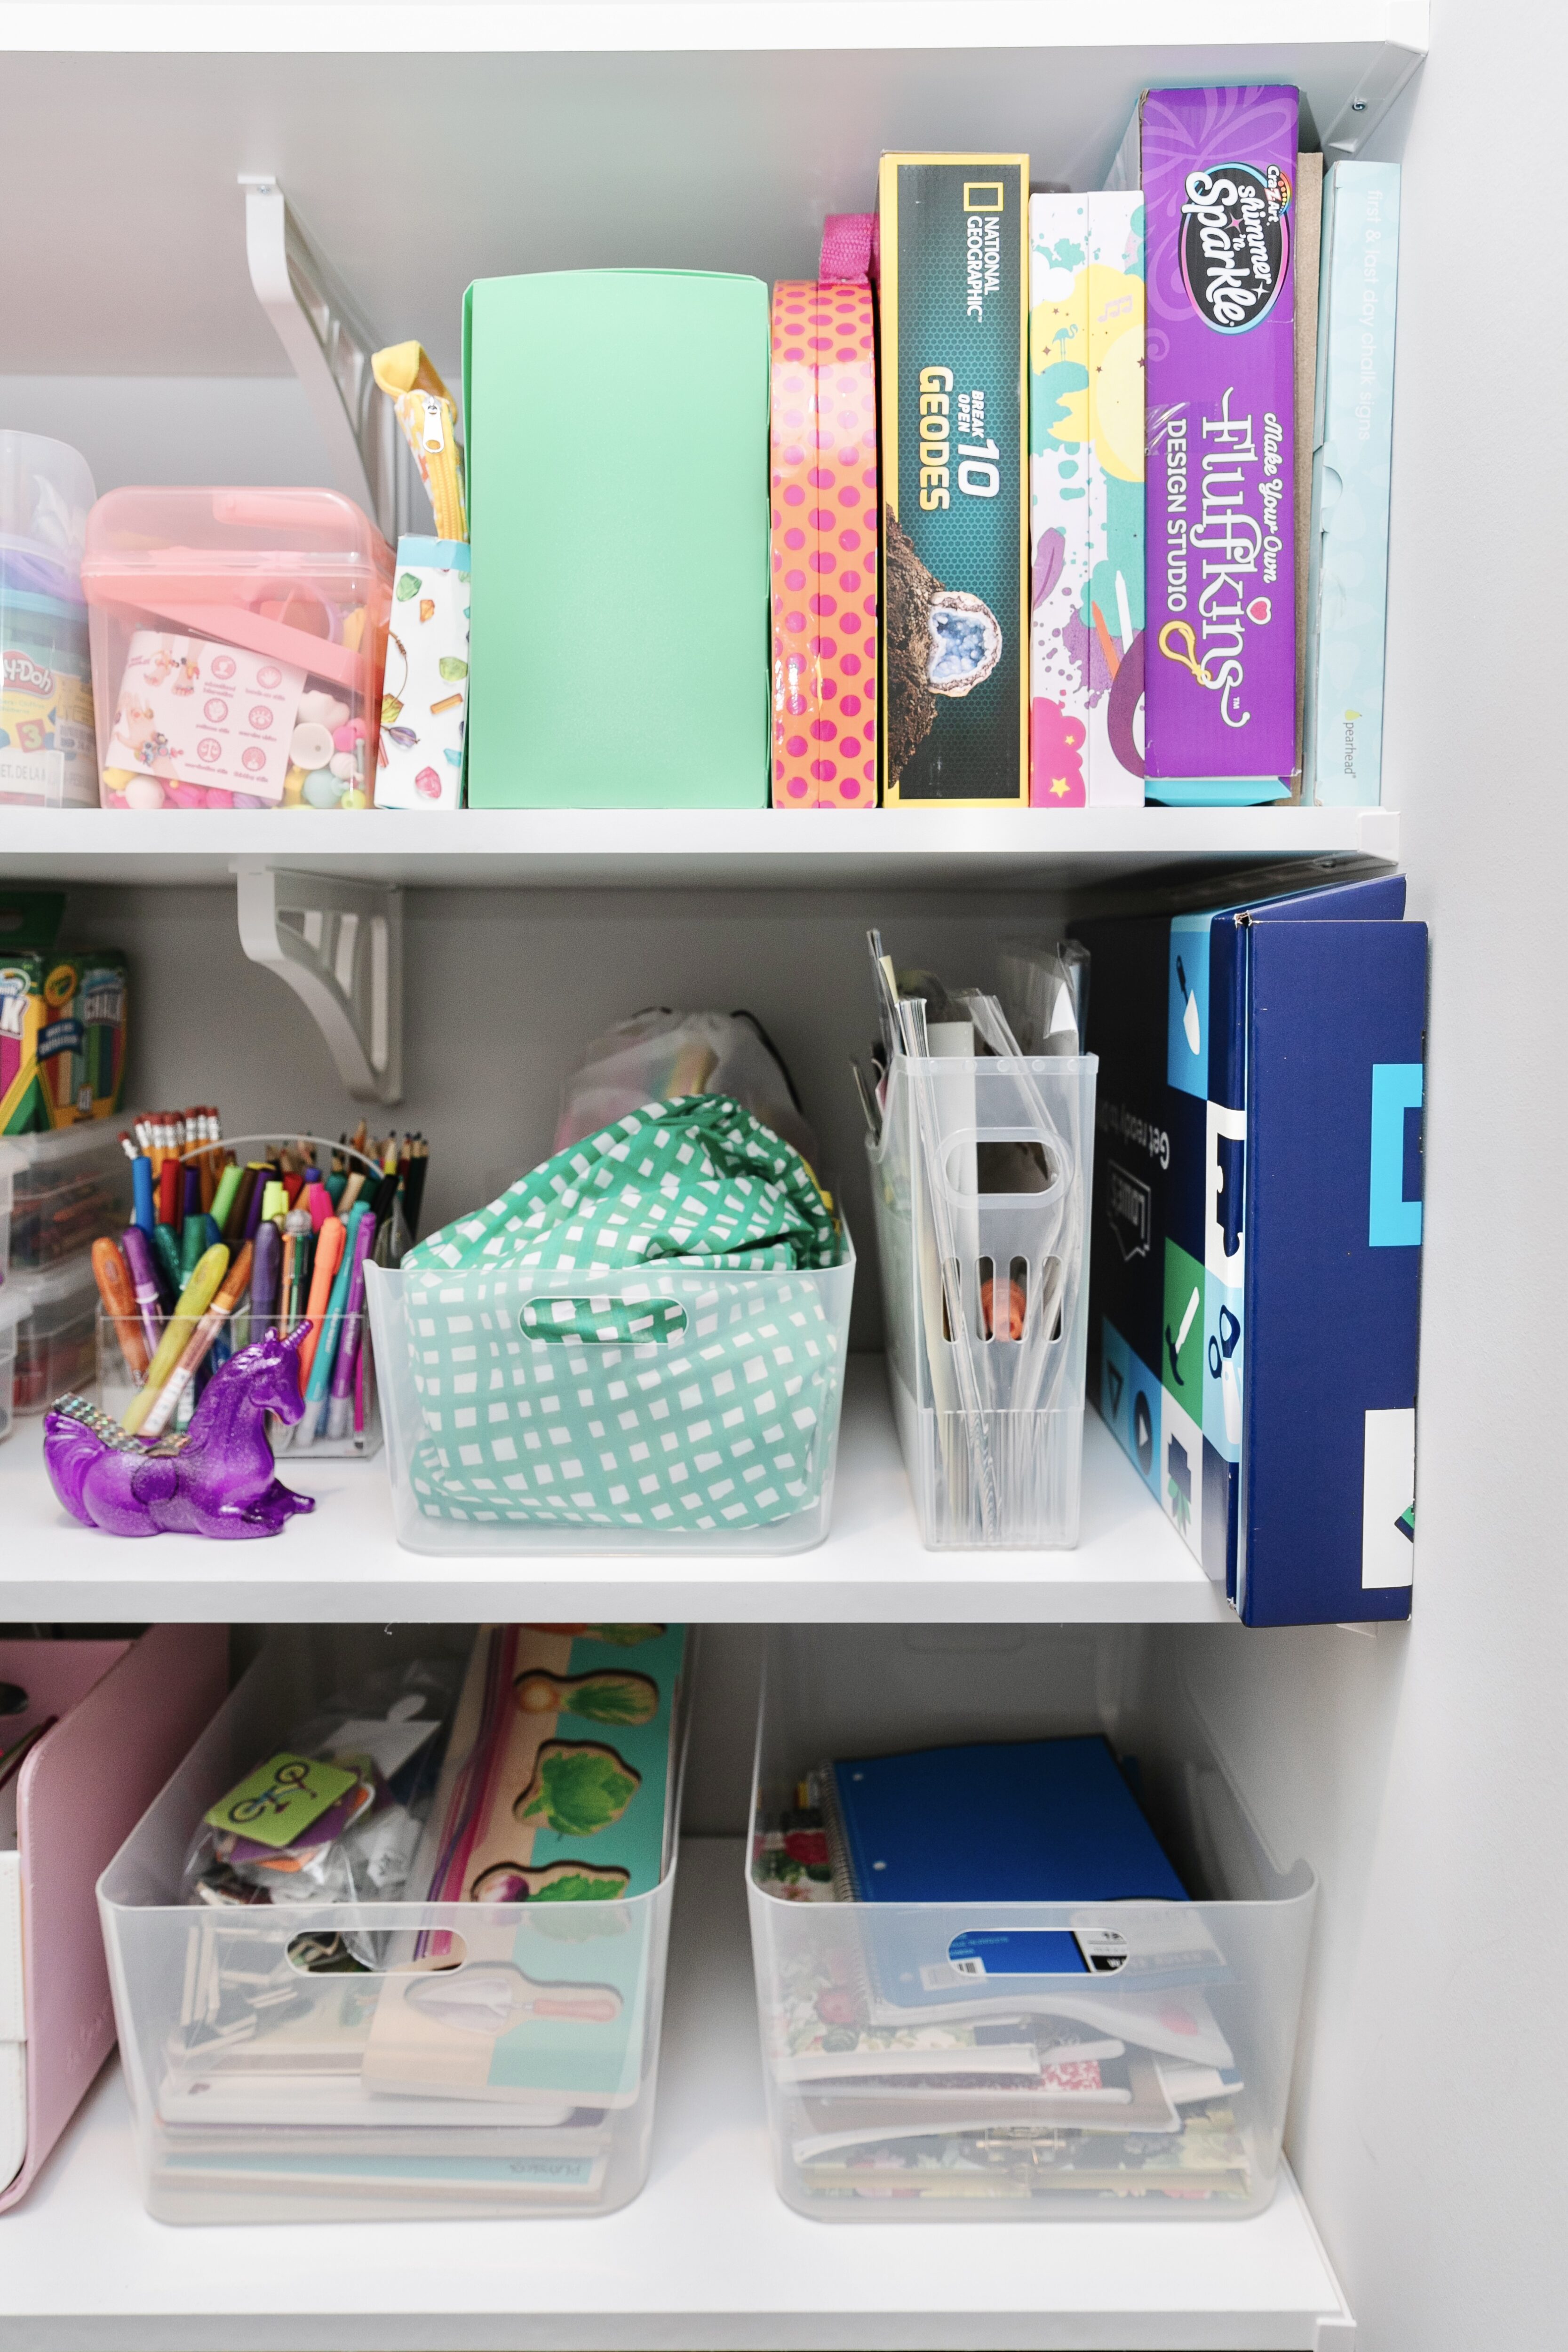 How to Organize Your Kids' Toys in their Play Room